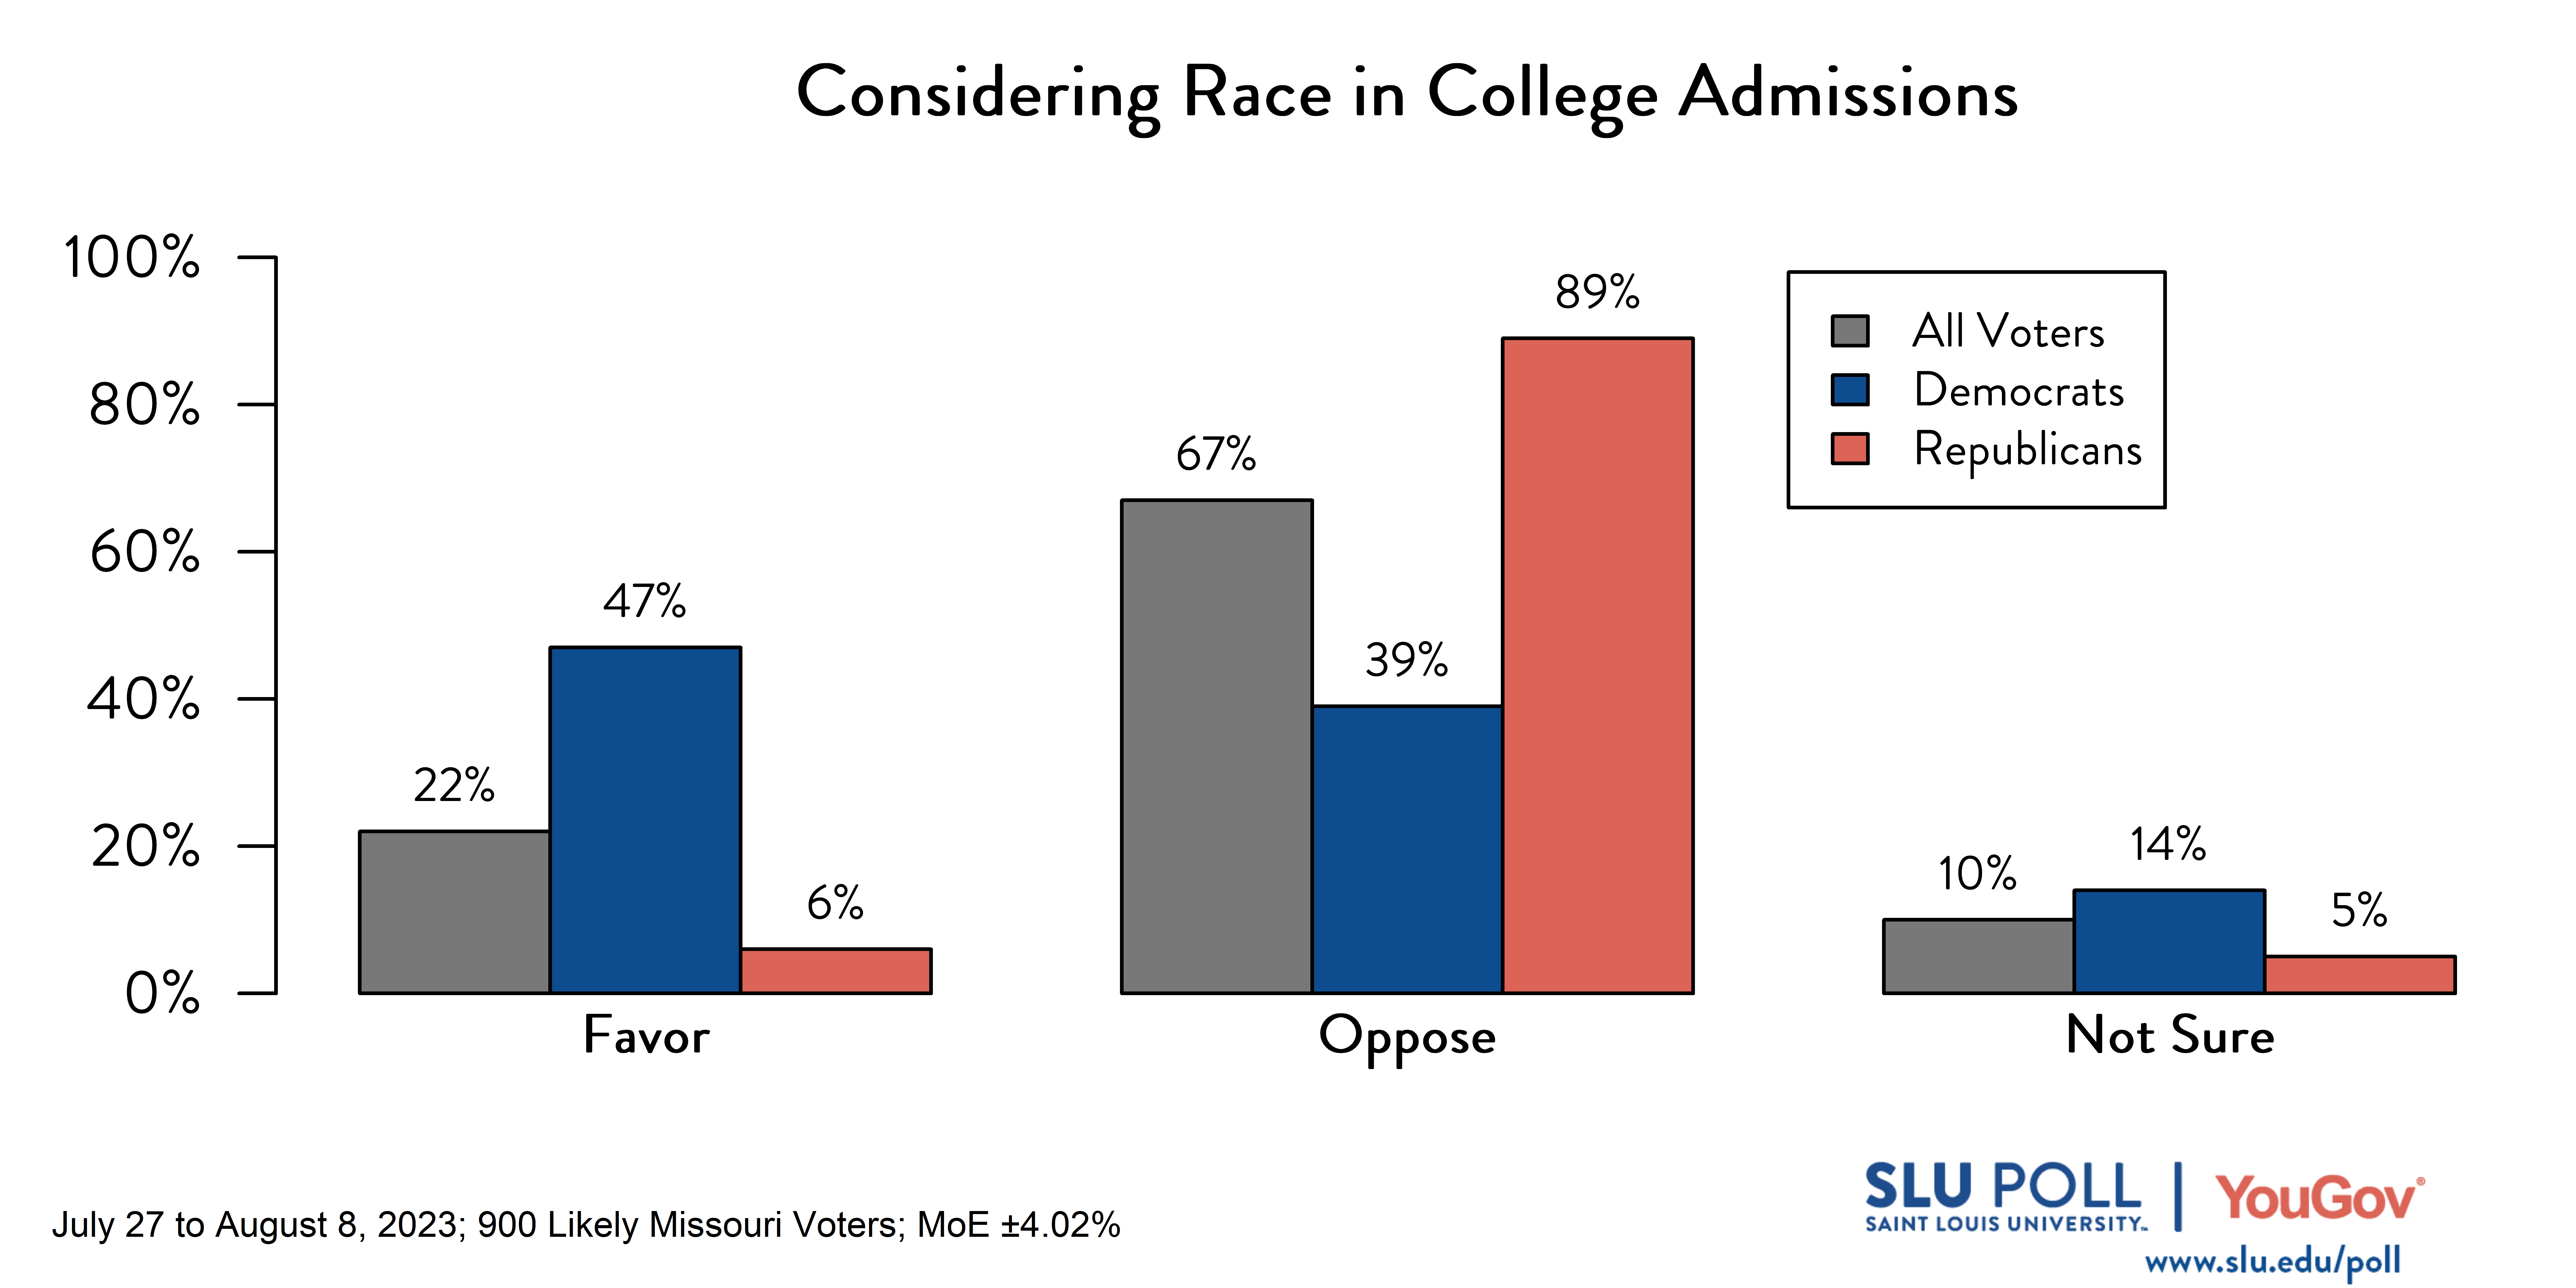 Likely voters' responses to 'Do you favor or oppose the following policies: Colleges being allowed to consider an applicant's race among other factors when making decisions on admissions.': 22% Favor, 67% Oppose, and 10% Not Sure. Democratic voters' responses: ' 47% Favor, 39% Oppose, and 14% Not Sure. Republican voters' responses: 6% Favor, 89% Oppose, and 5% Not Sure.